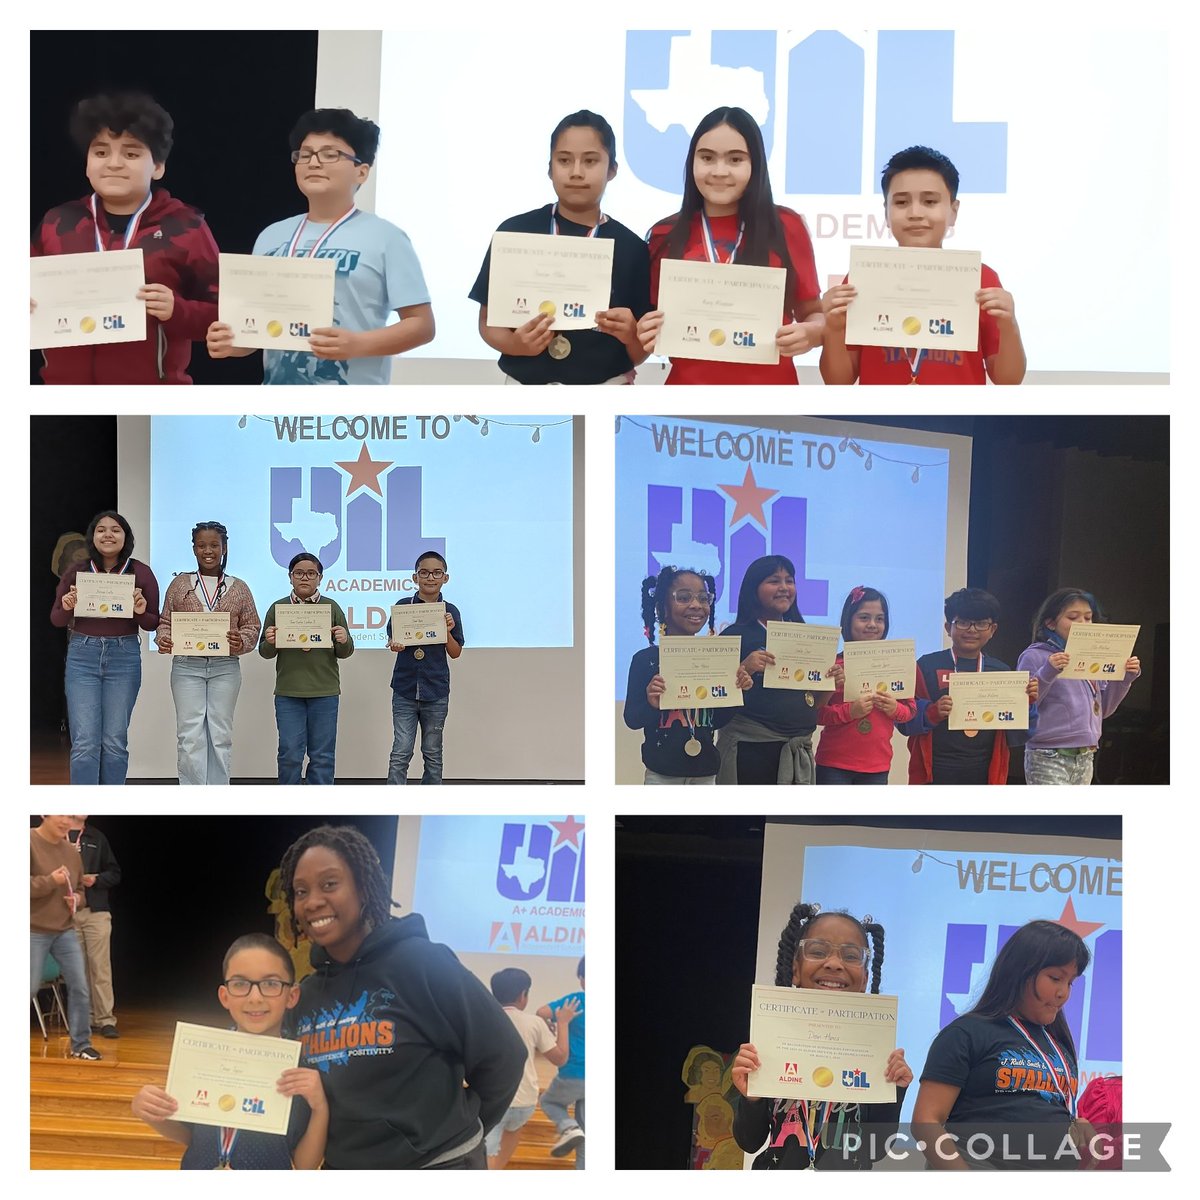 Late post! Saturday was a great day for our @SmithES_AISD scholars to participate in the A+ Academics UIL competition. Our students really did their best and got to go home with some hardware 🏅 🥈 🎖 🥉 #SomoStallions @NoLeaderLikeMe @mrabotelho